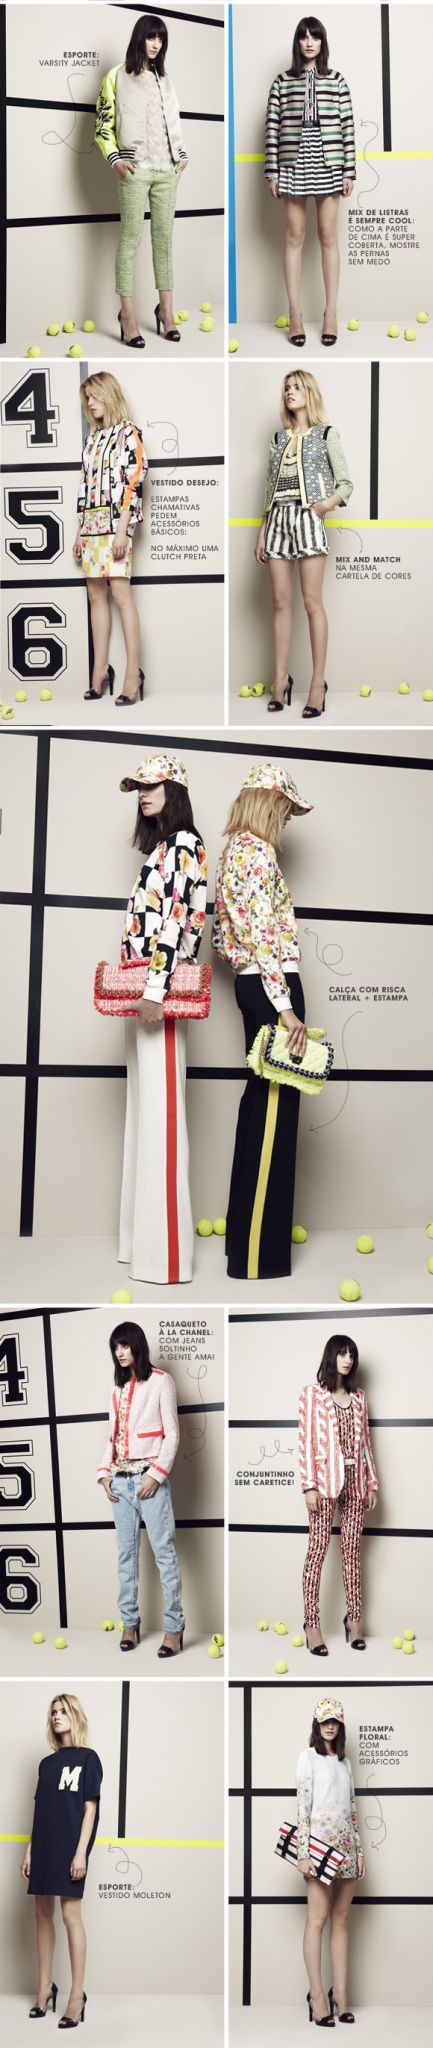 Dicas de styling - lookmook MSGM